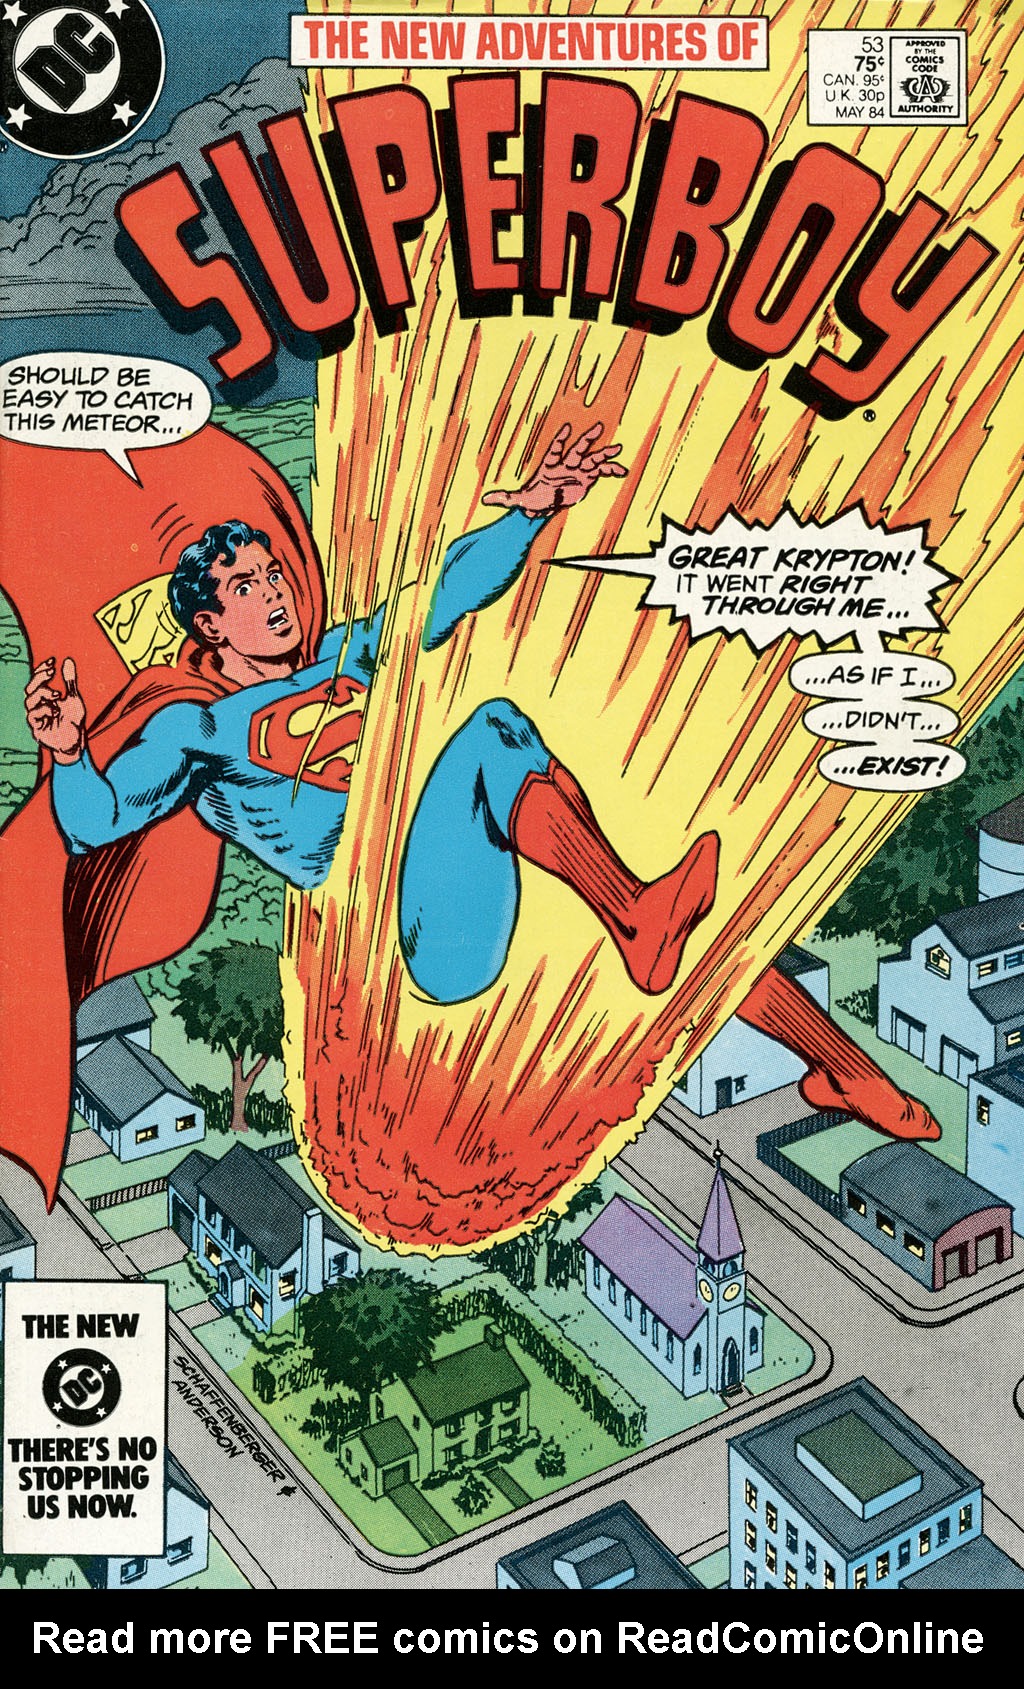 Read online The New Adventures of Superboy comic -  Issue #53 - 1